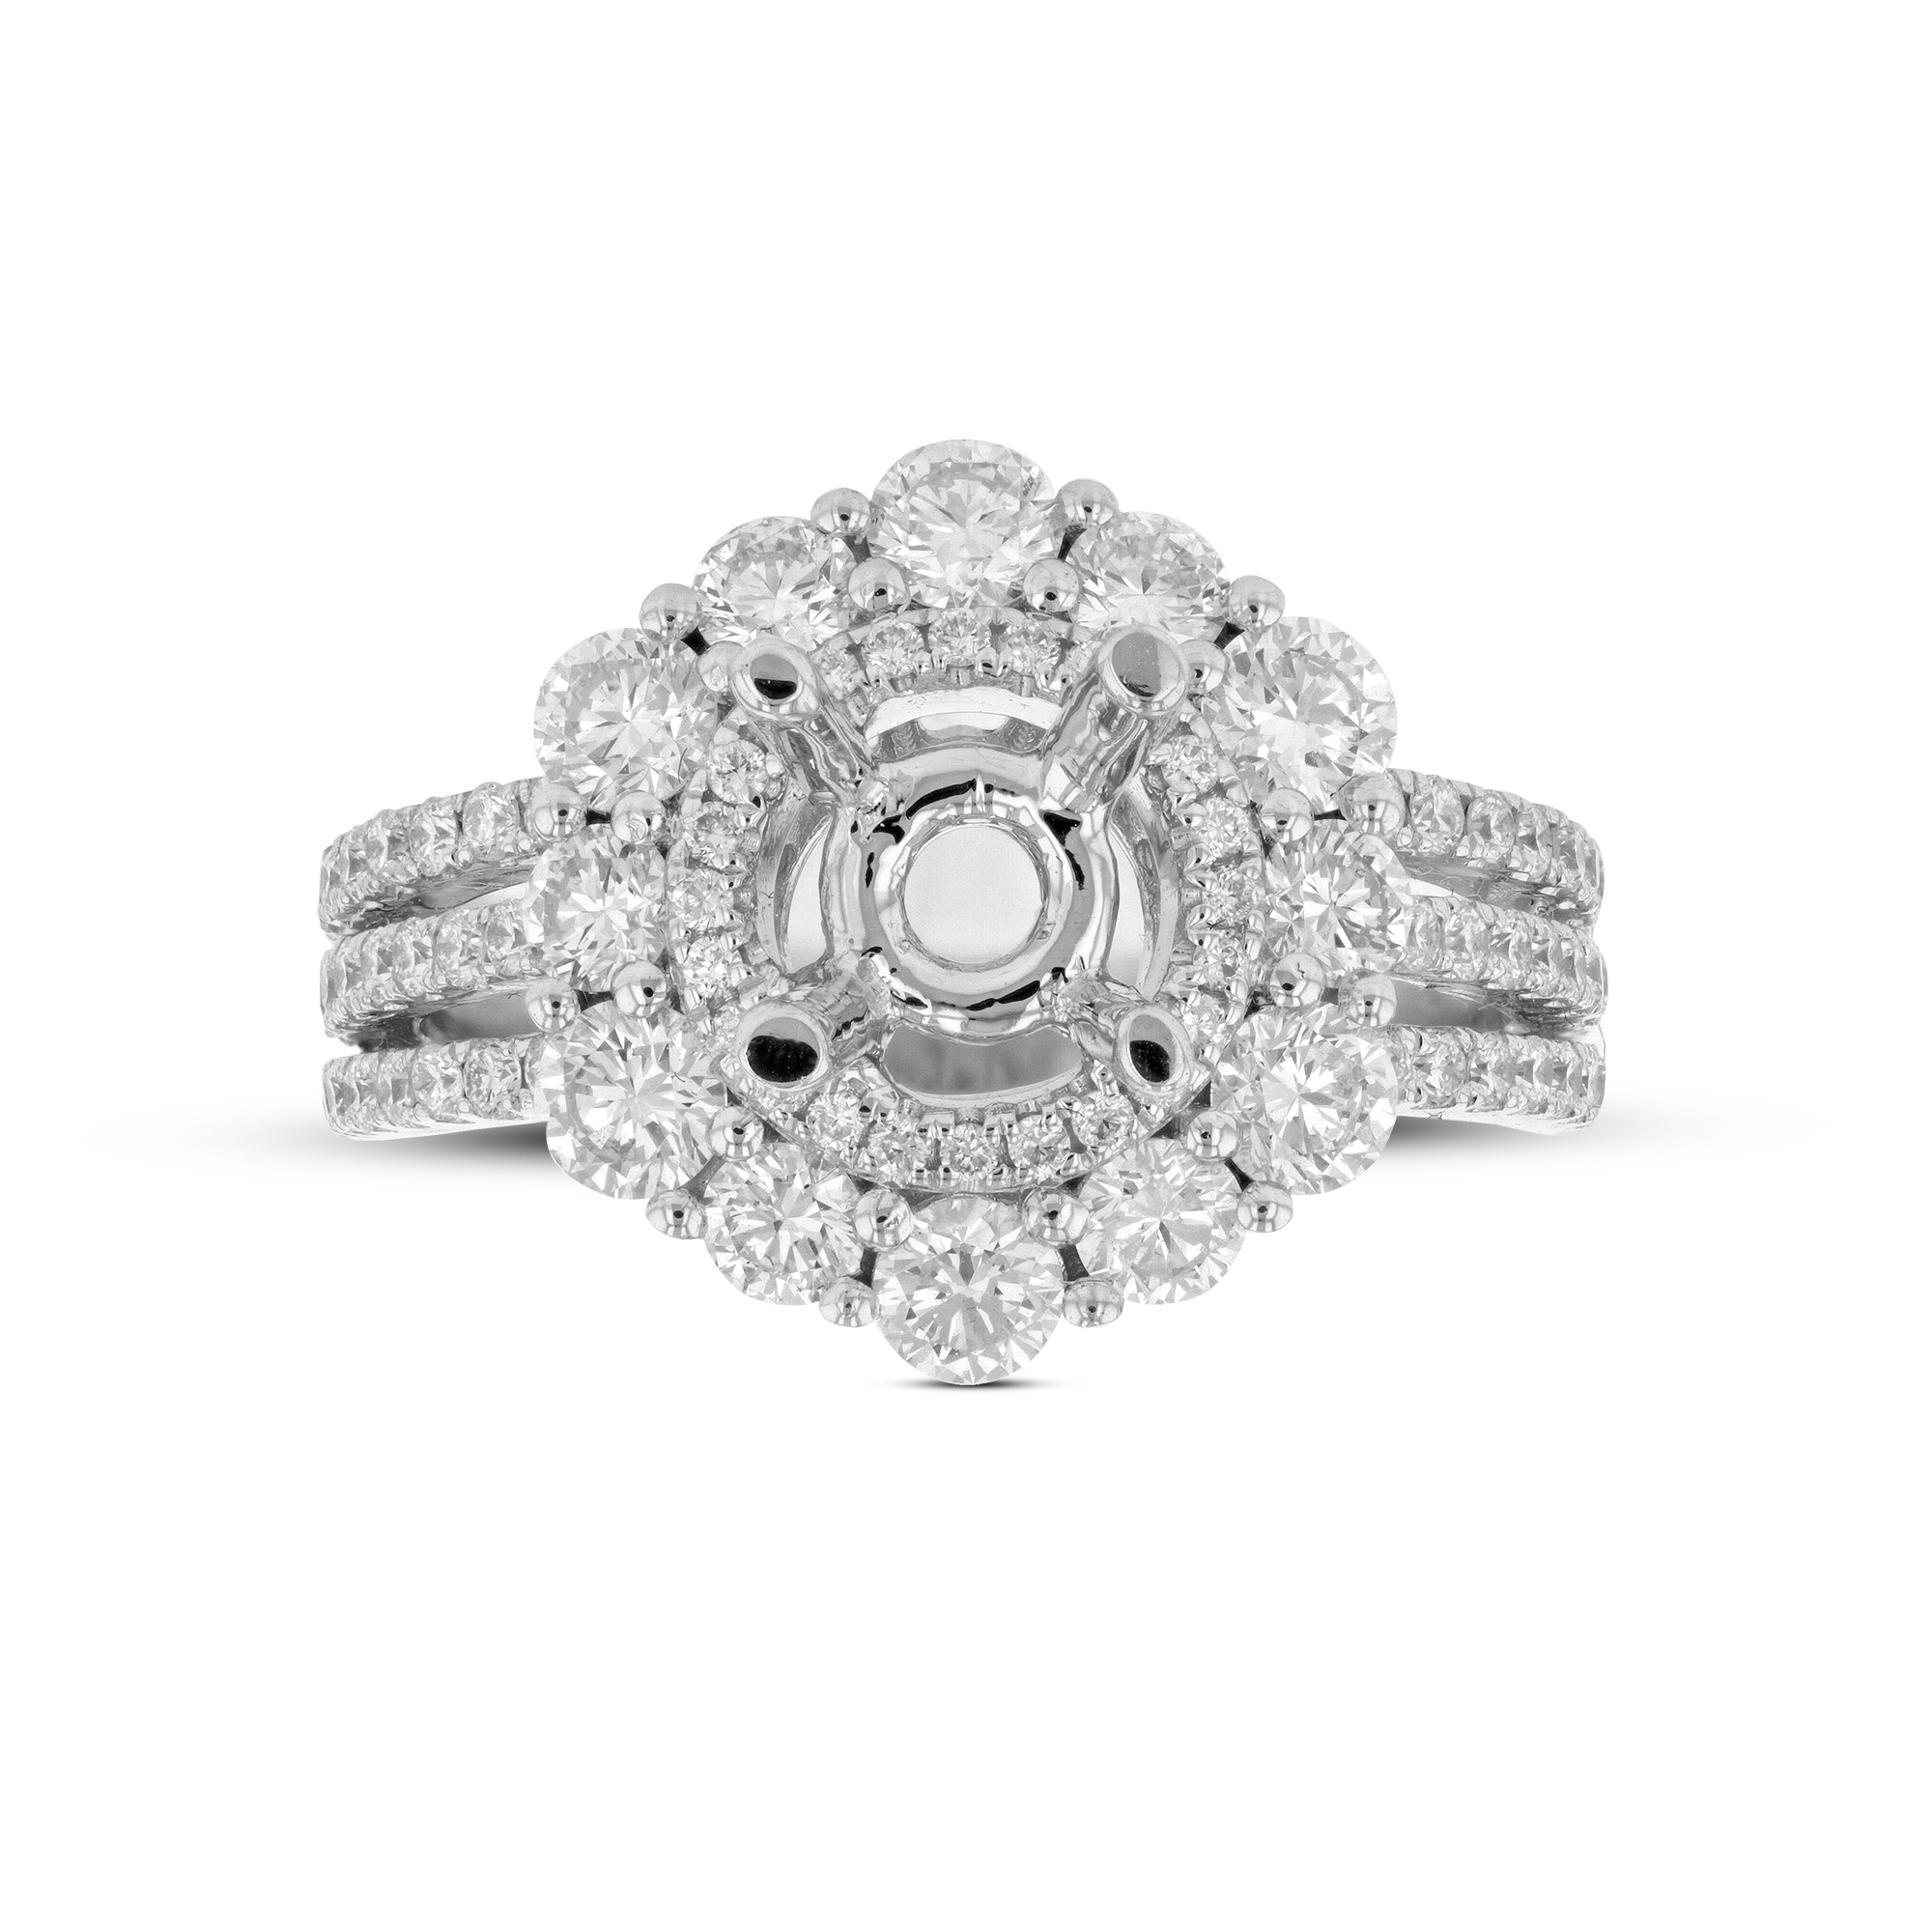 View 1.57ctw Diamond Semi Mount Engagement Ring in 18k White Gold